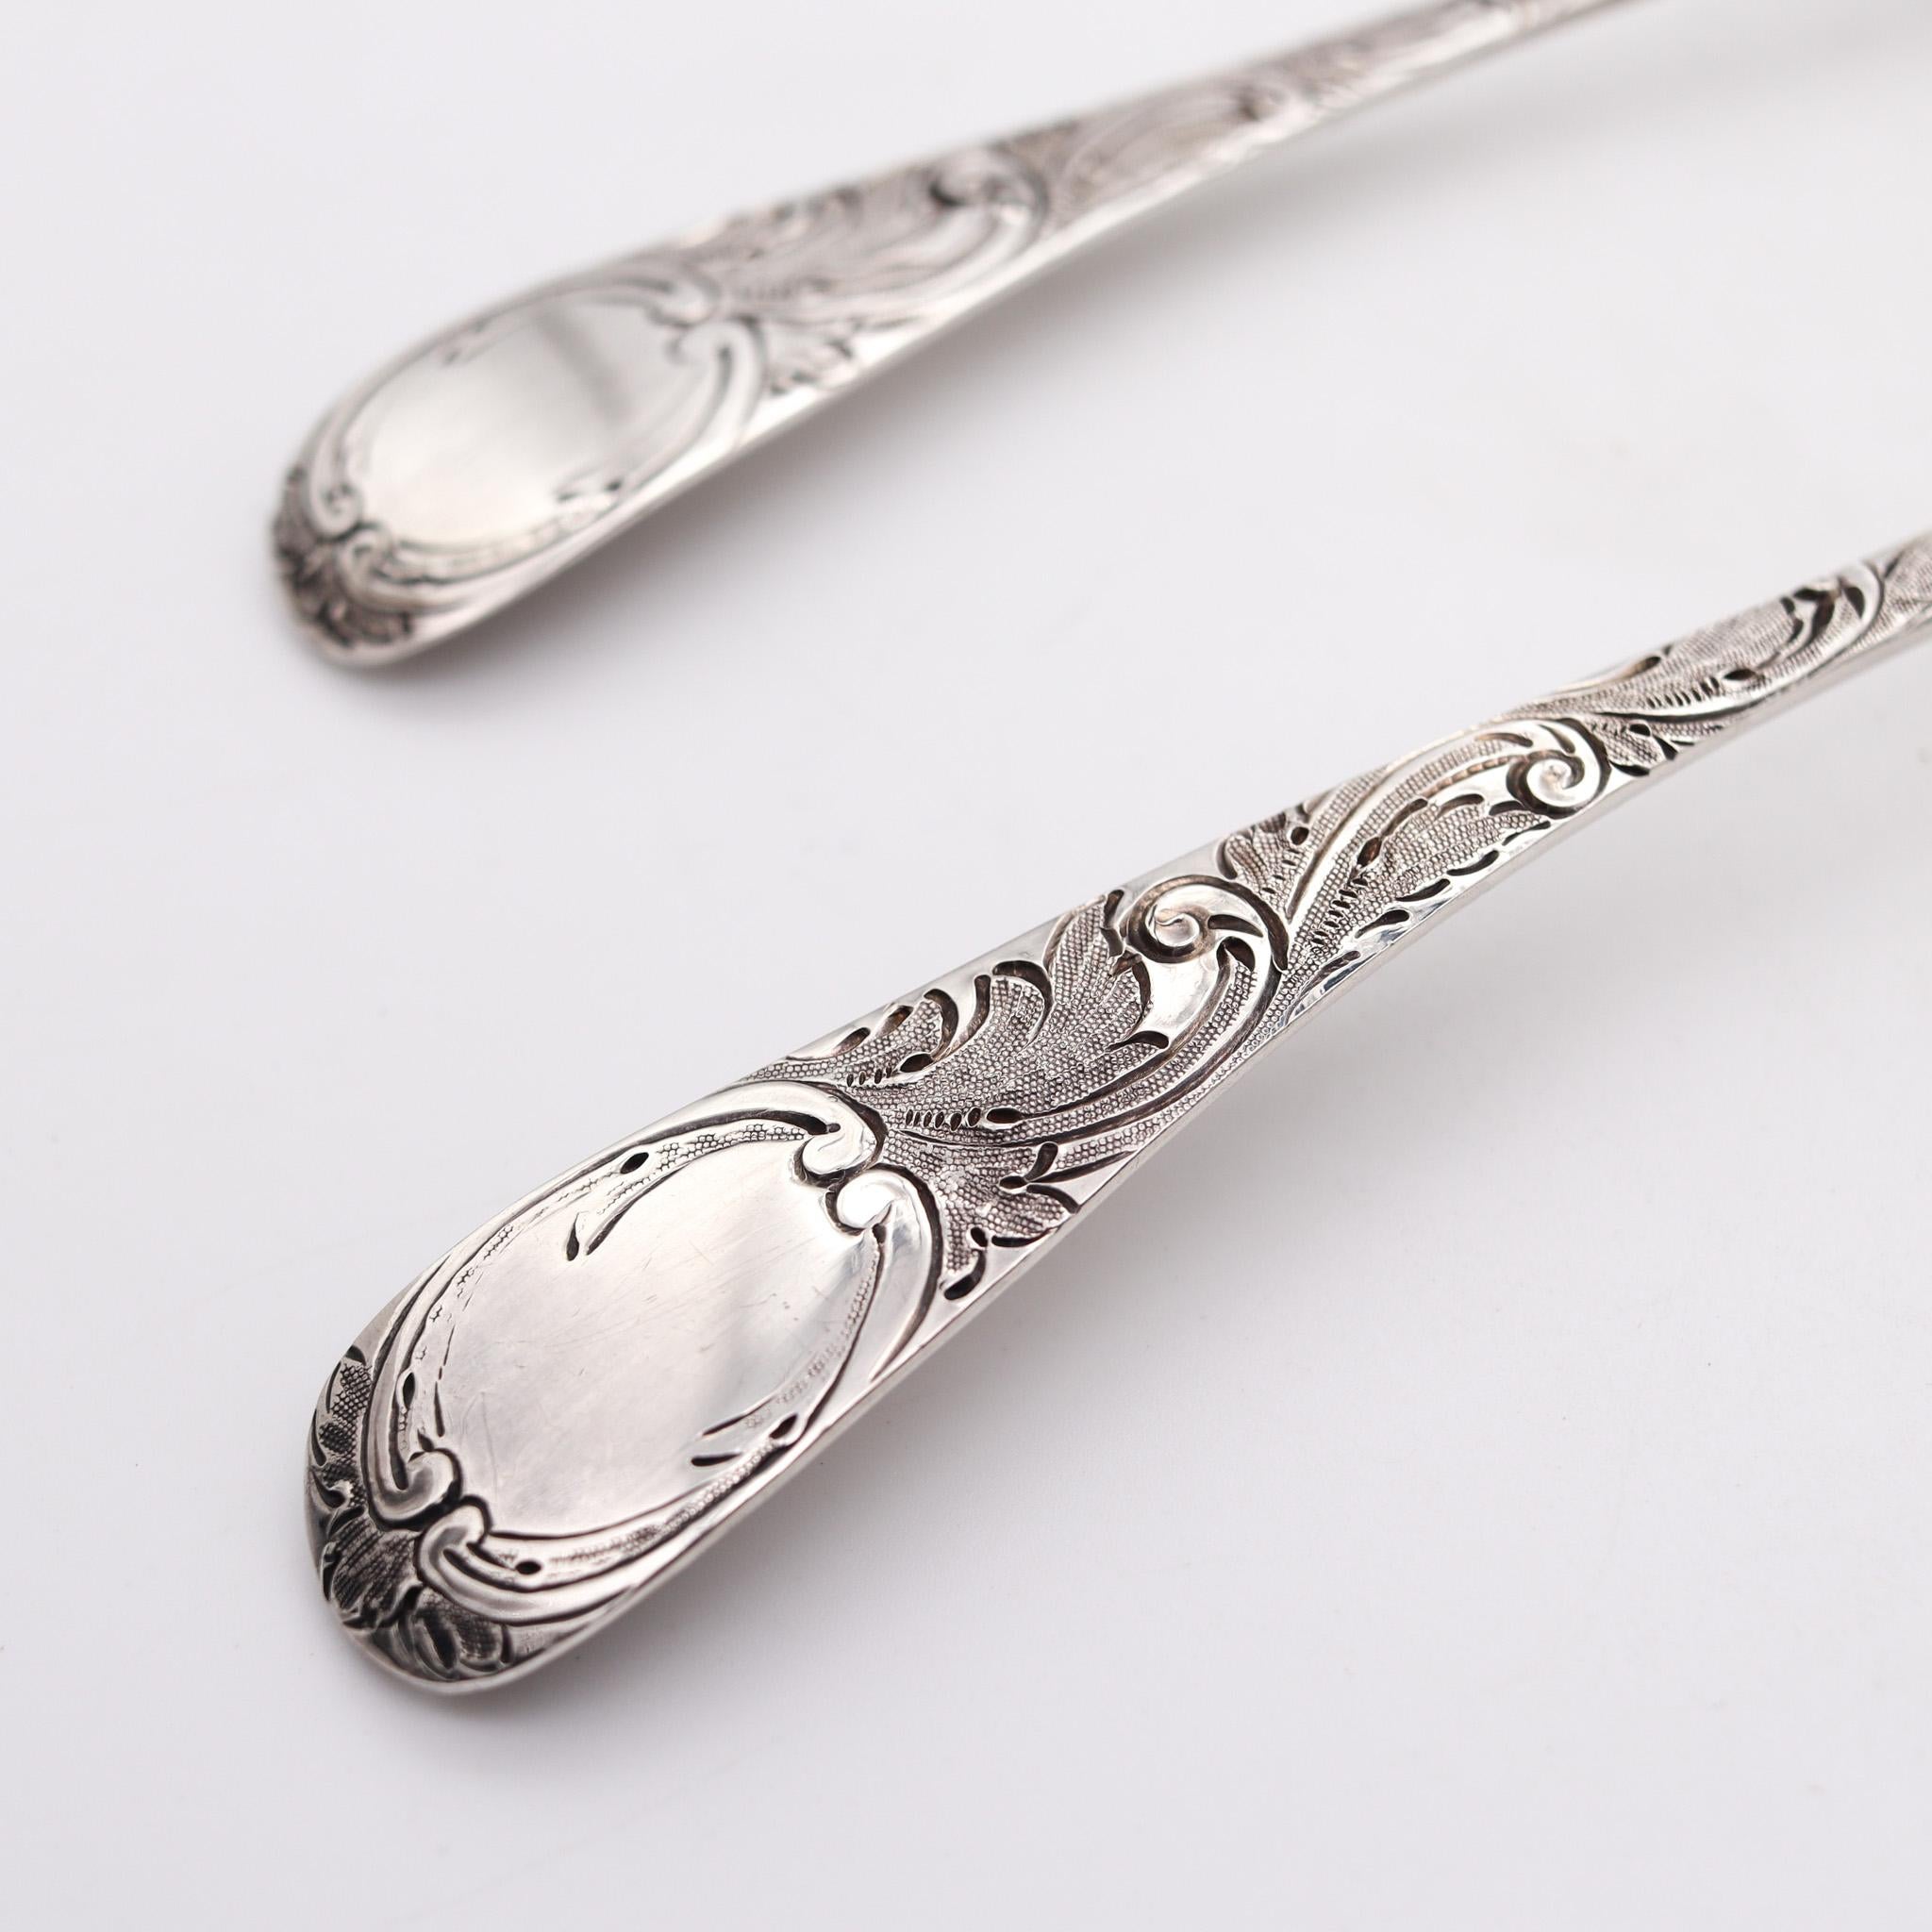 Repoussé Thomas Barker 1825 London Georgian Pair of Fruit Spoons in Gilded .925 Sterling For Sale